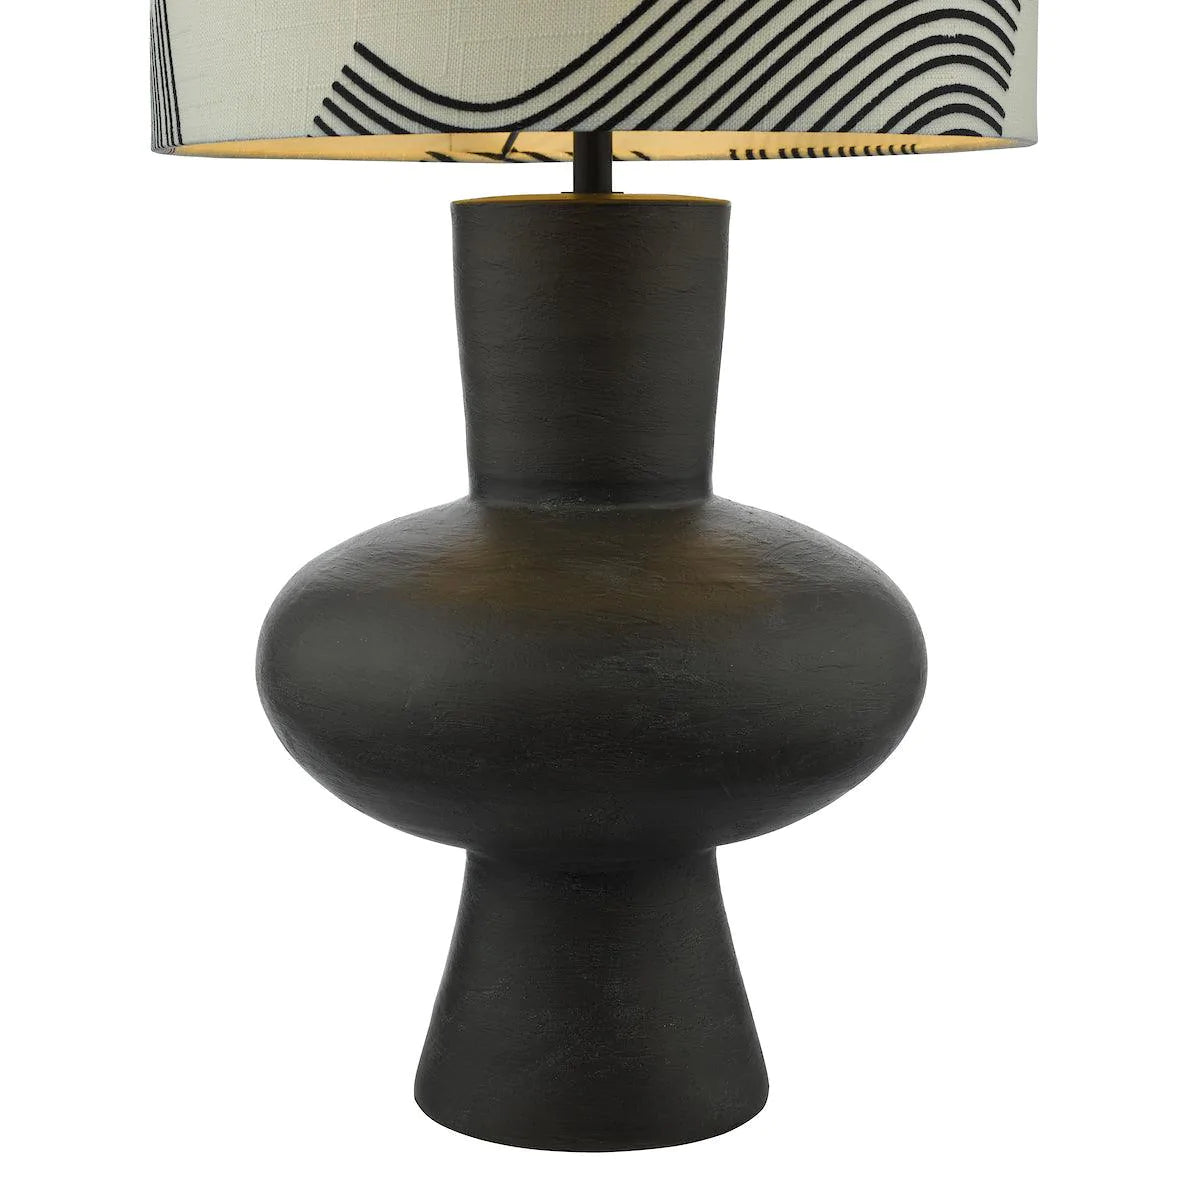 Miho Table Lamp Black/Bronze With Shade MIH4222 - Peter Murphy Lighting & Electrical Ltd